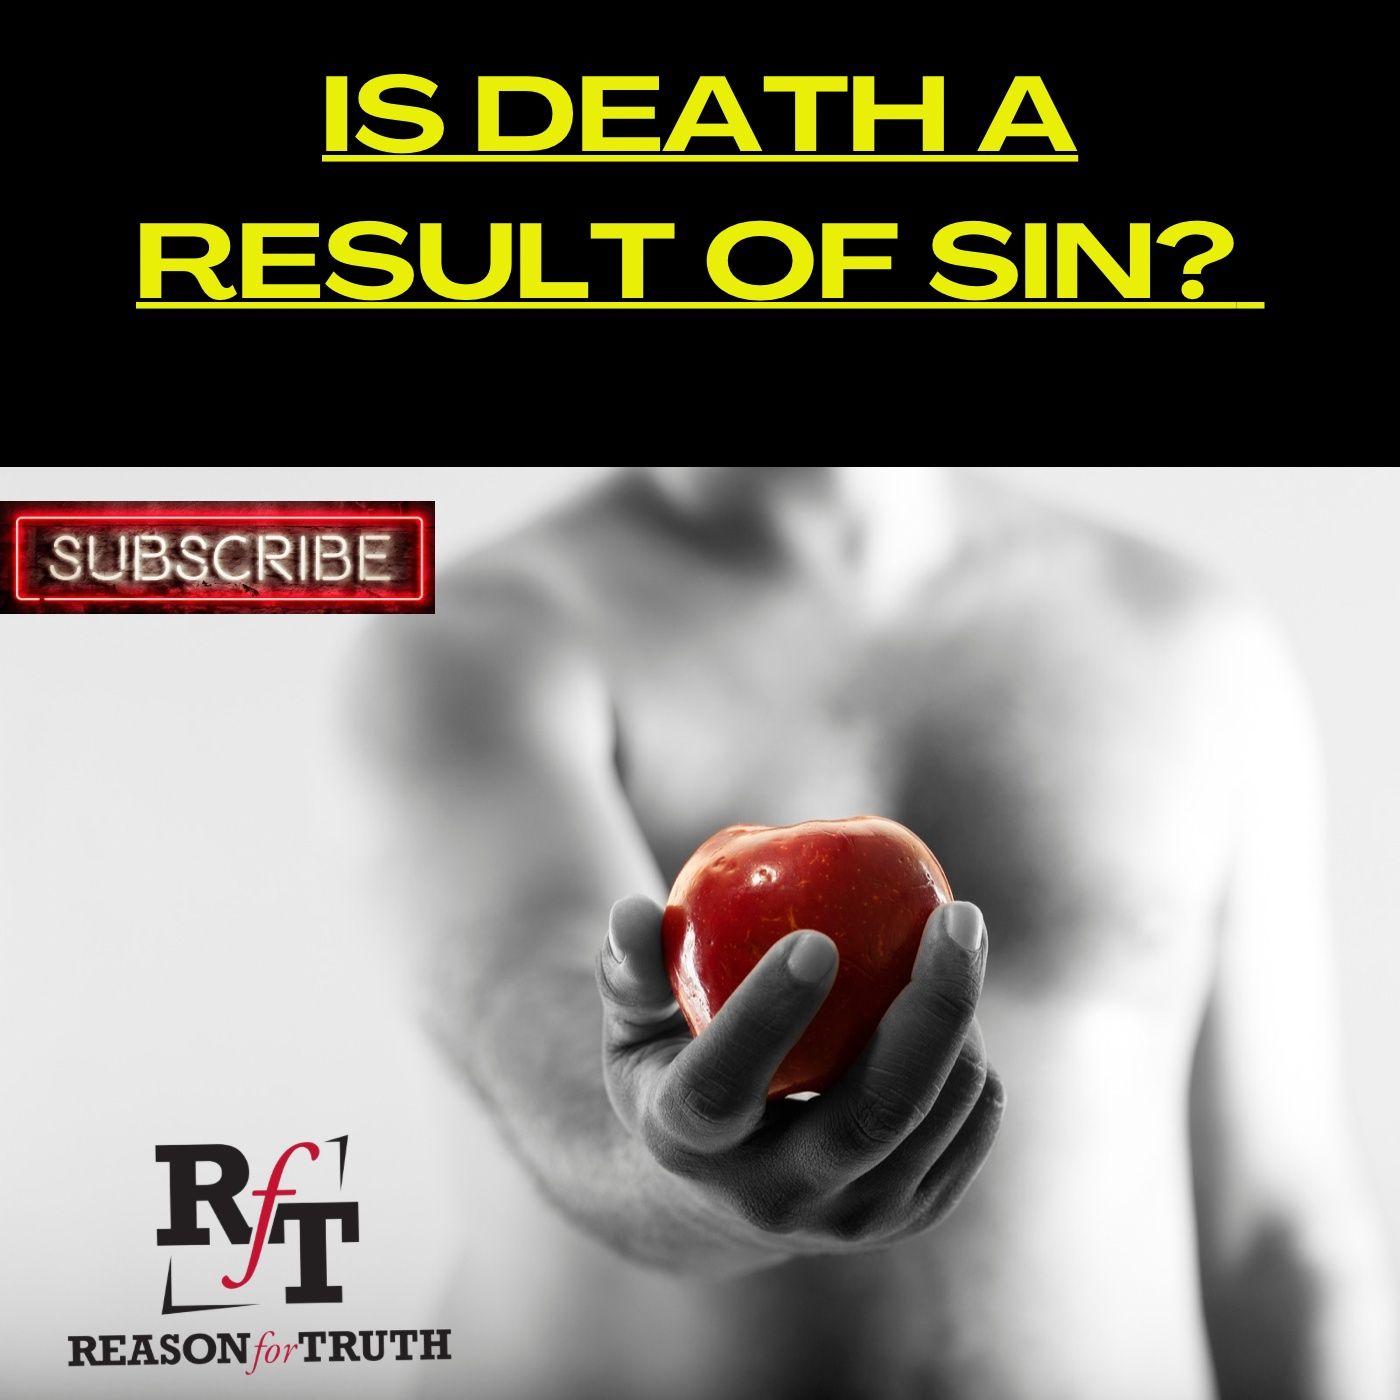 Is Death The Result of Sin? - 10:14:22, 5.29 PM